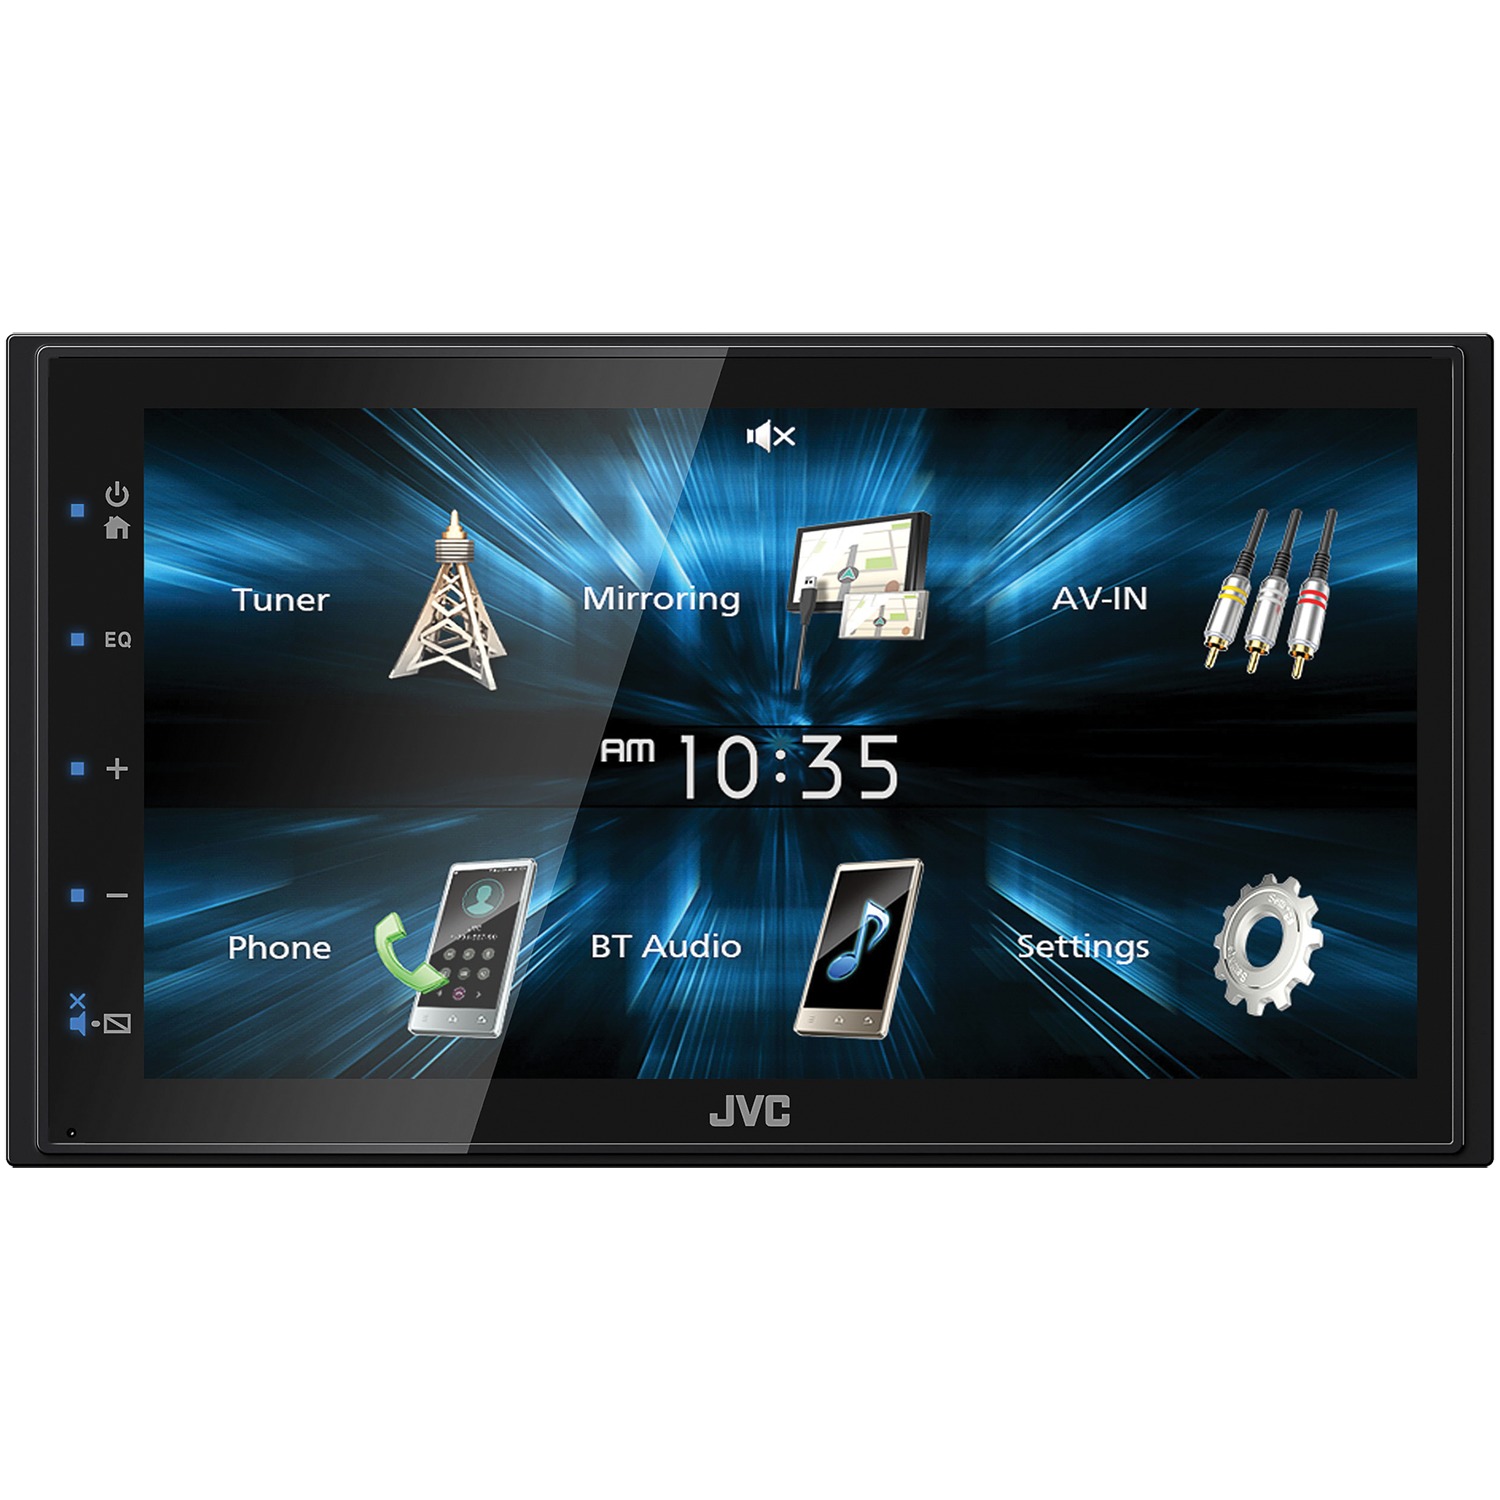 JVC KW-M150BT 6.8-Inch Double DIN In-Dash WVGA Digital Media Receiver, Bluetooth and USB Mirroring for Android - image 1 of 3